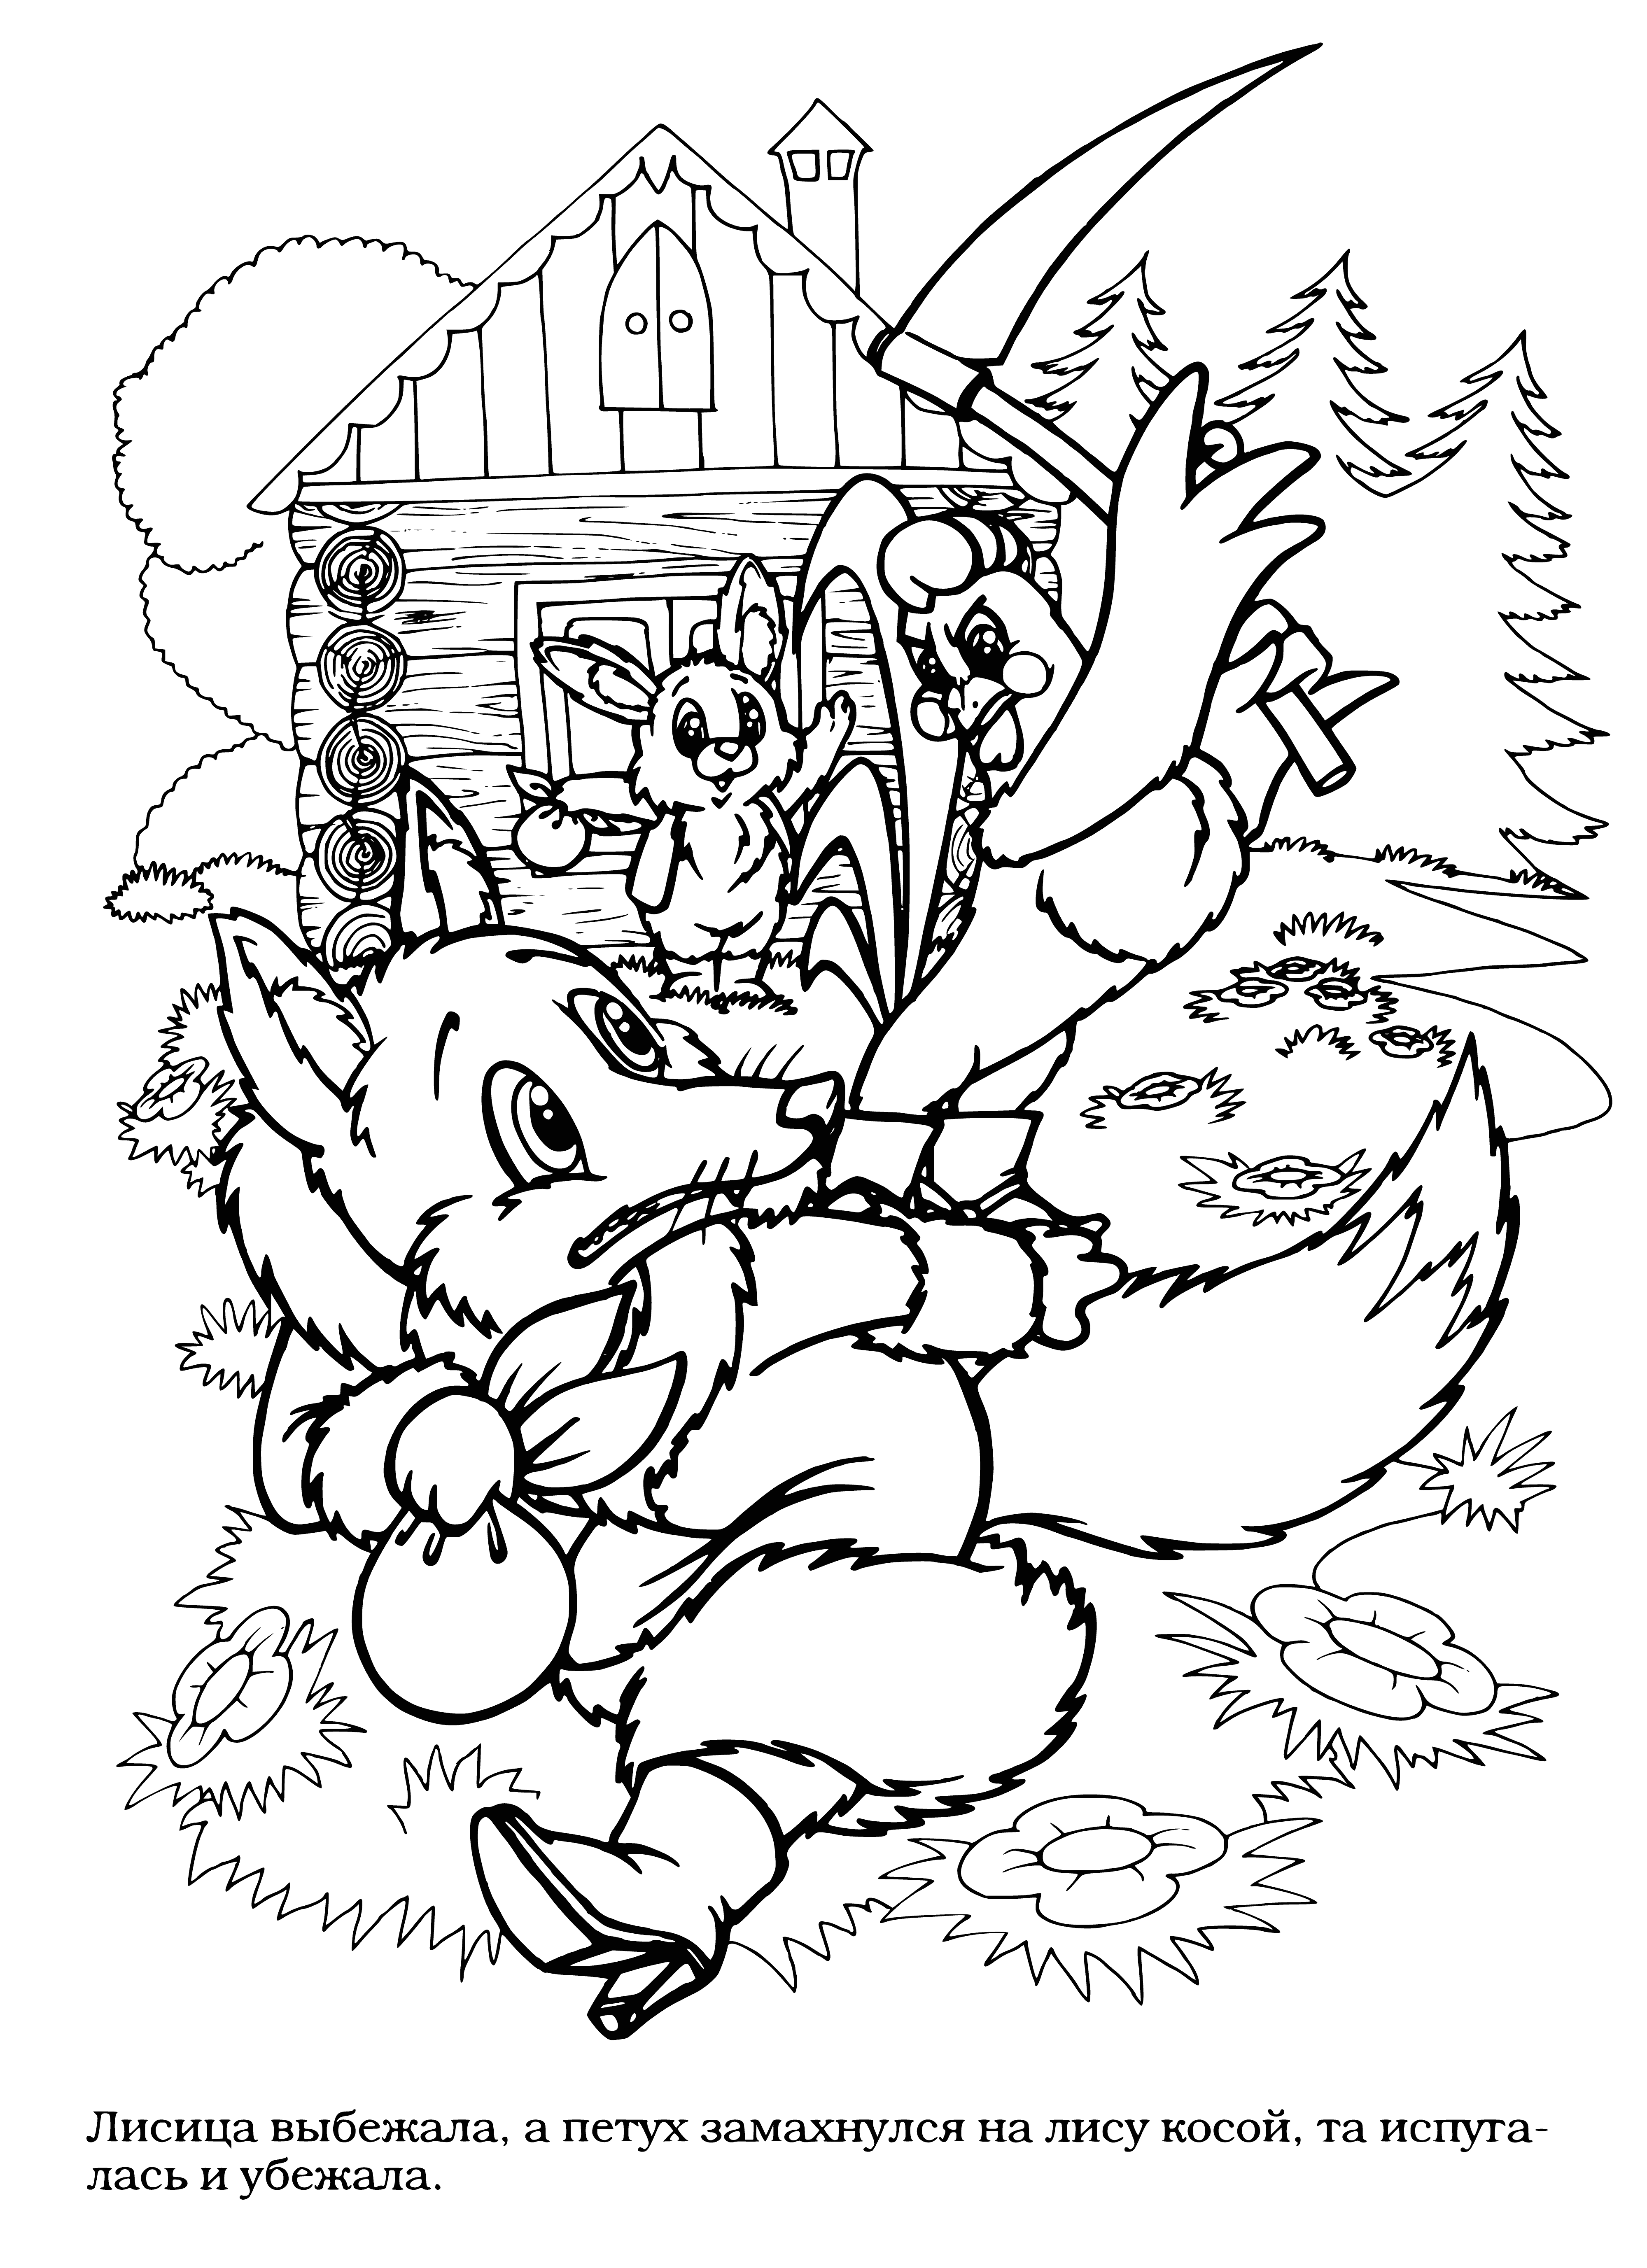 coloring page: Fox runs through snowy forest with wolf in hot pursuit; wolf is about to catch fox who's looking back over shoulder.